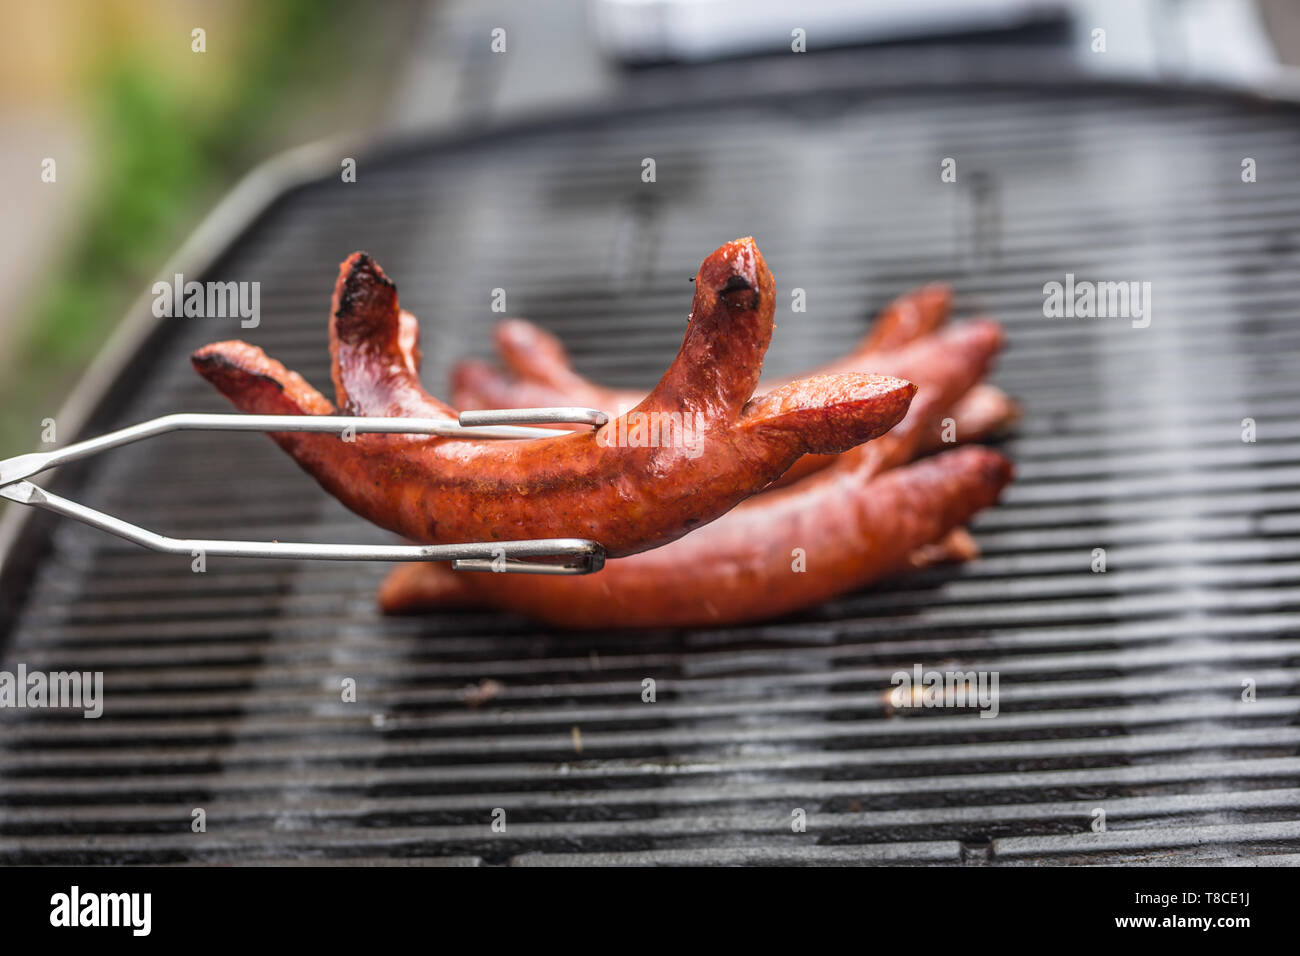 Delicious smoked sausages on the barbecue garden grill Stock Photo